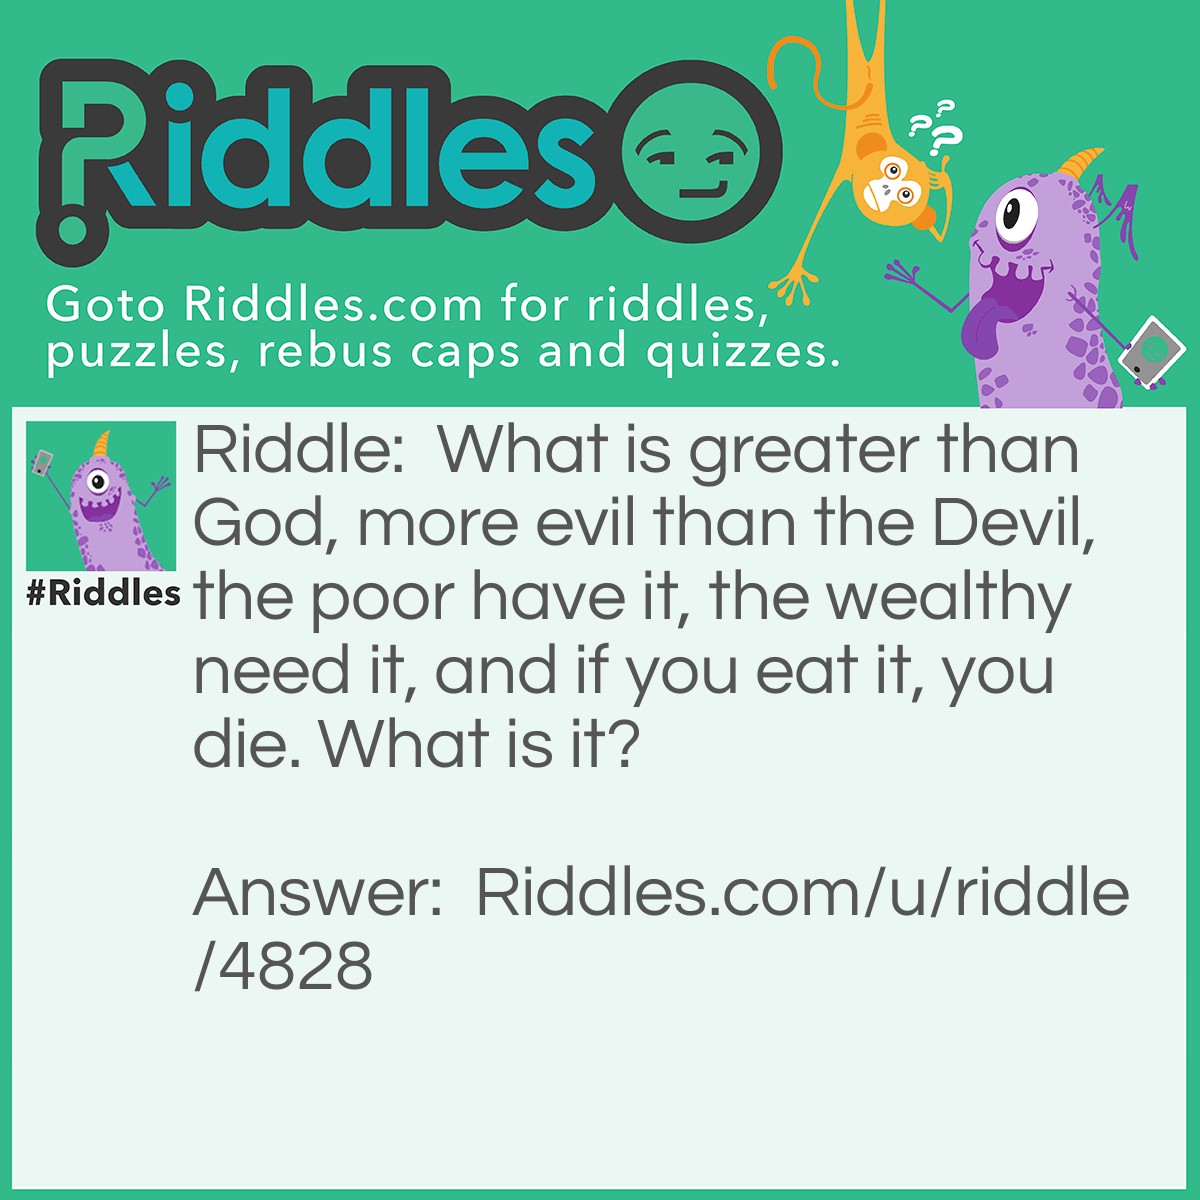 Riddle: What is greater than God, more evil than the Devil, the poor have it, the wealthy need it, and if you eat it, you die. What is it? Answer: Nothing.